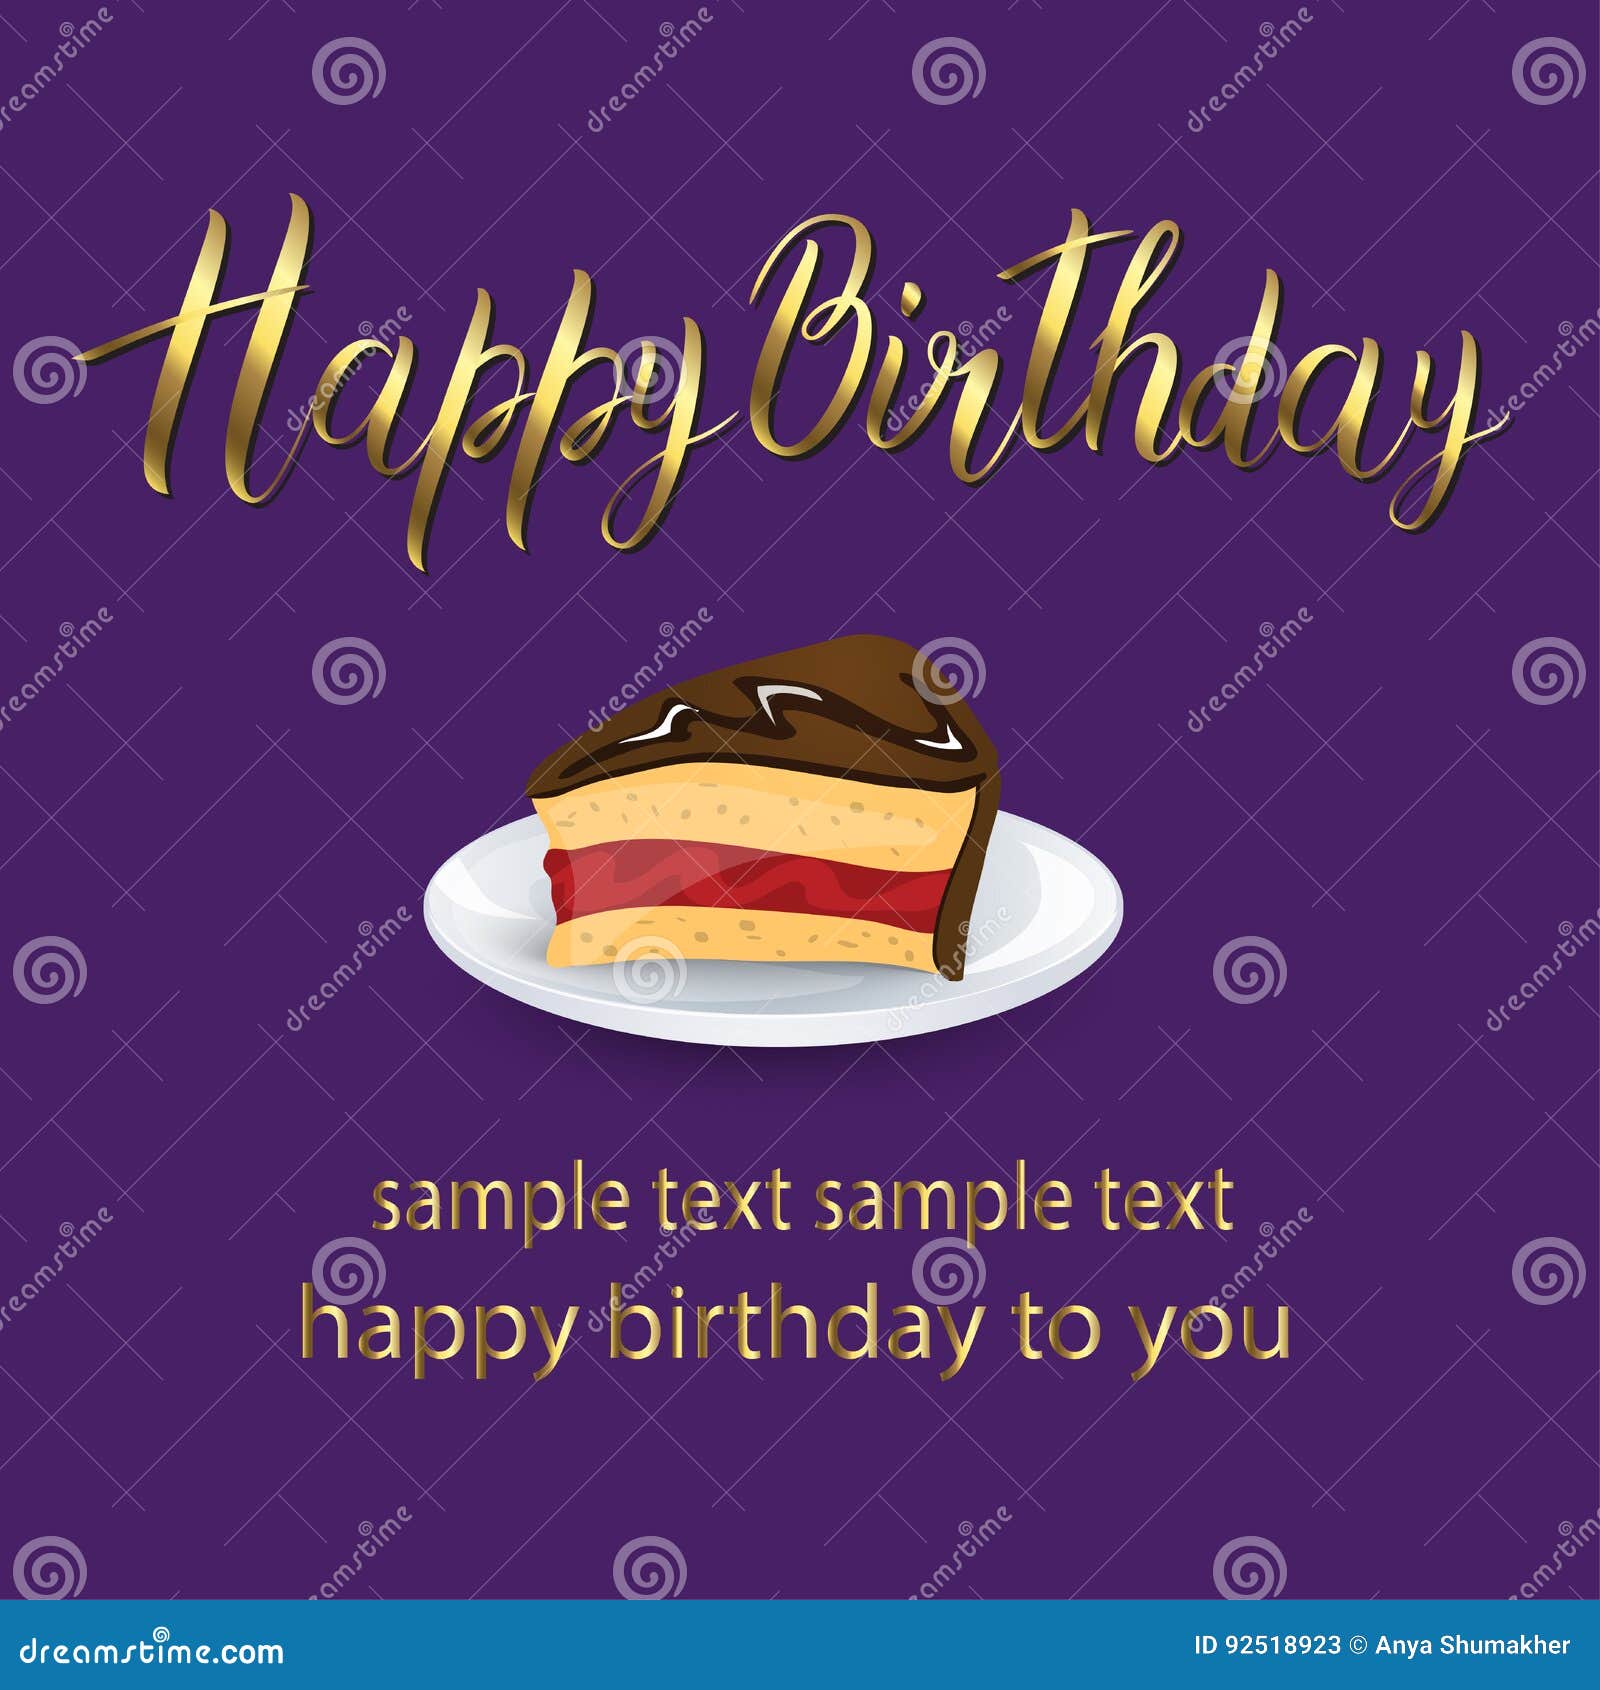 Cake letters ah Royalty Free Vector Image - VectorStock